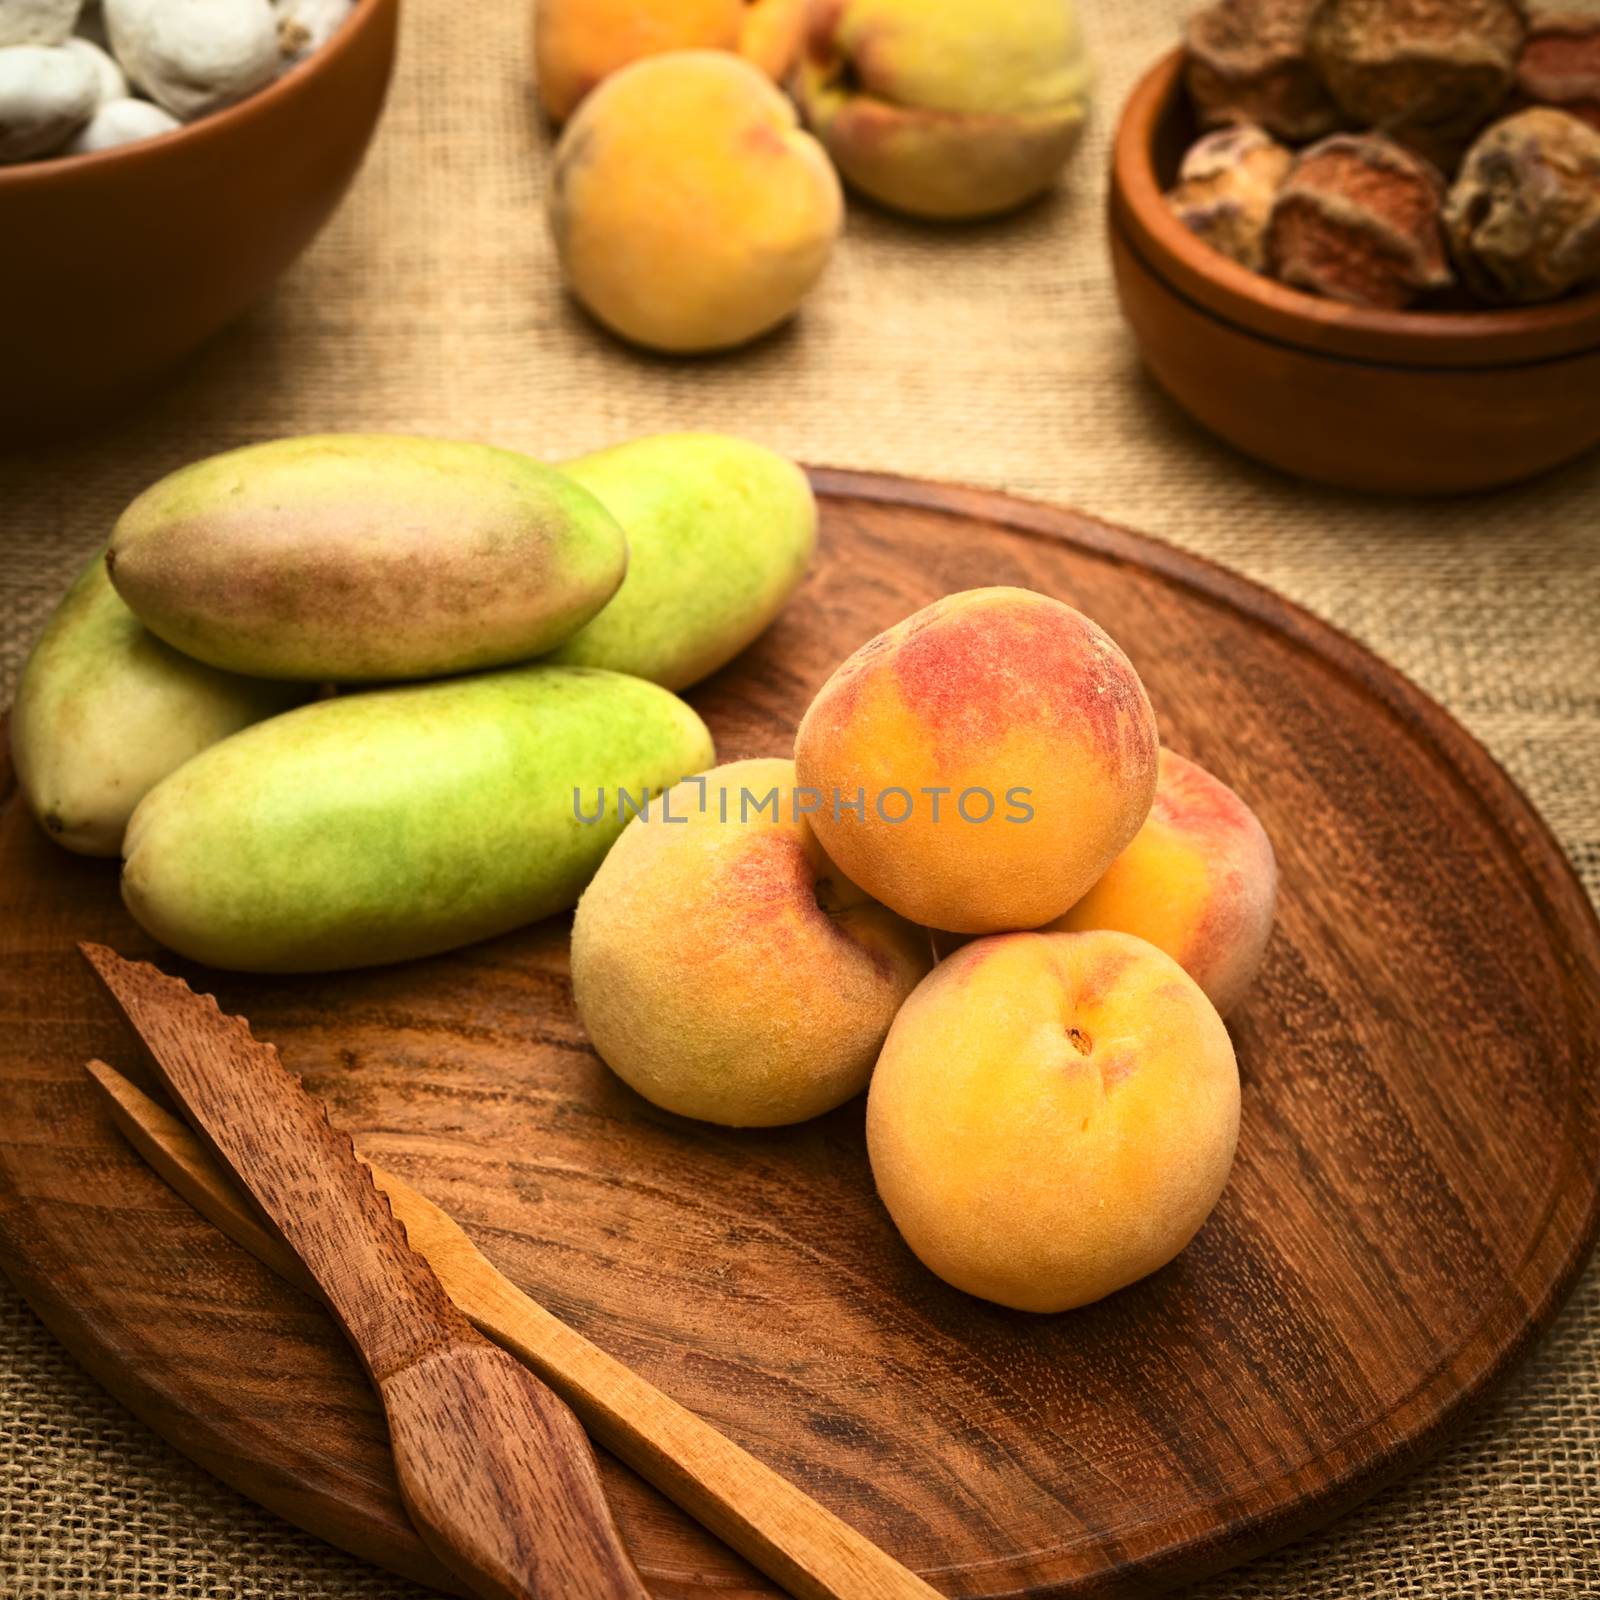 Peaches on round wooden plate with banana passionfruit (lat. Passiflora tripartita) next to it, photographed with natural light (Selective Focus, Focus on the front of the peaches)